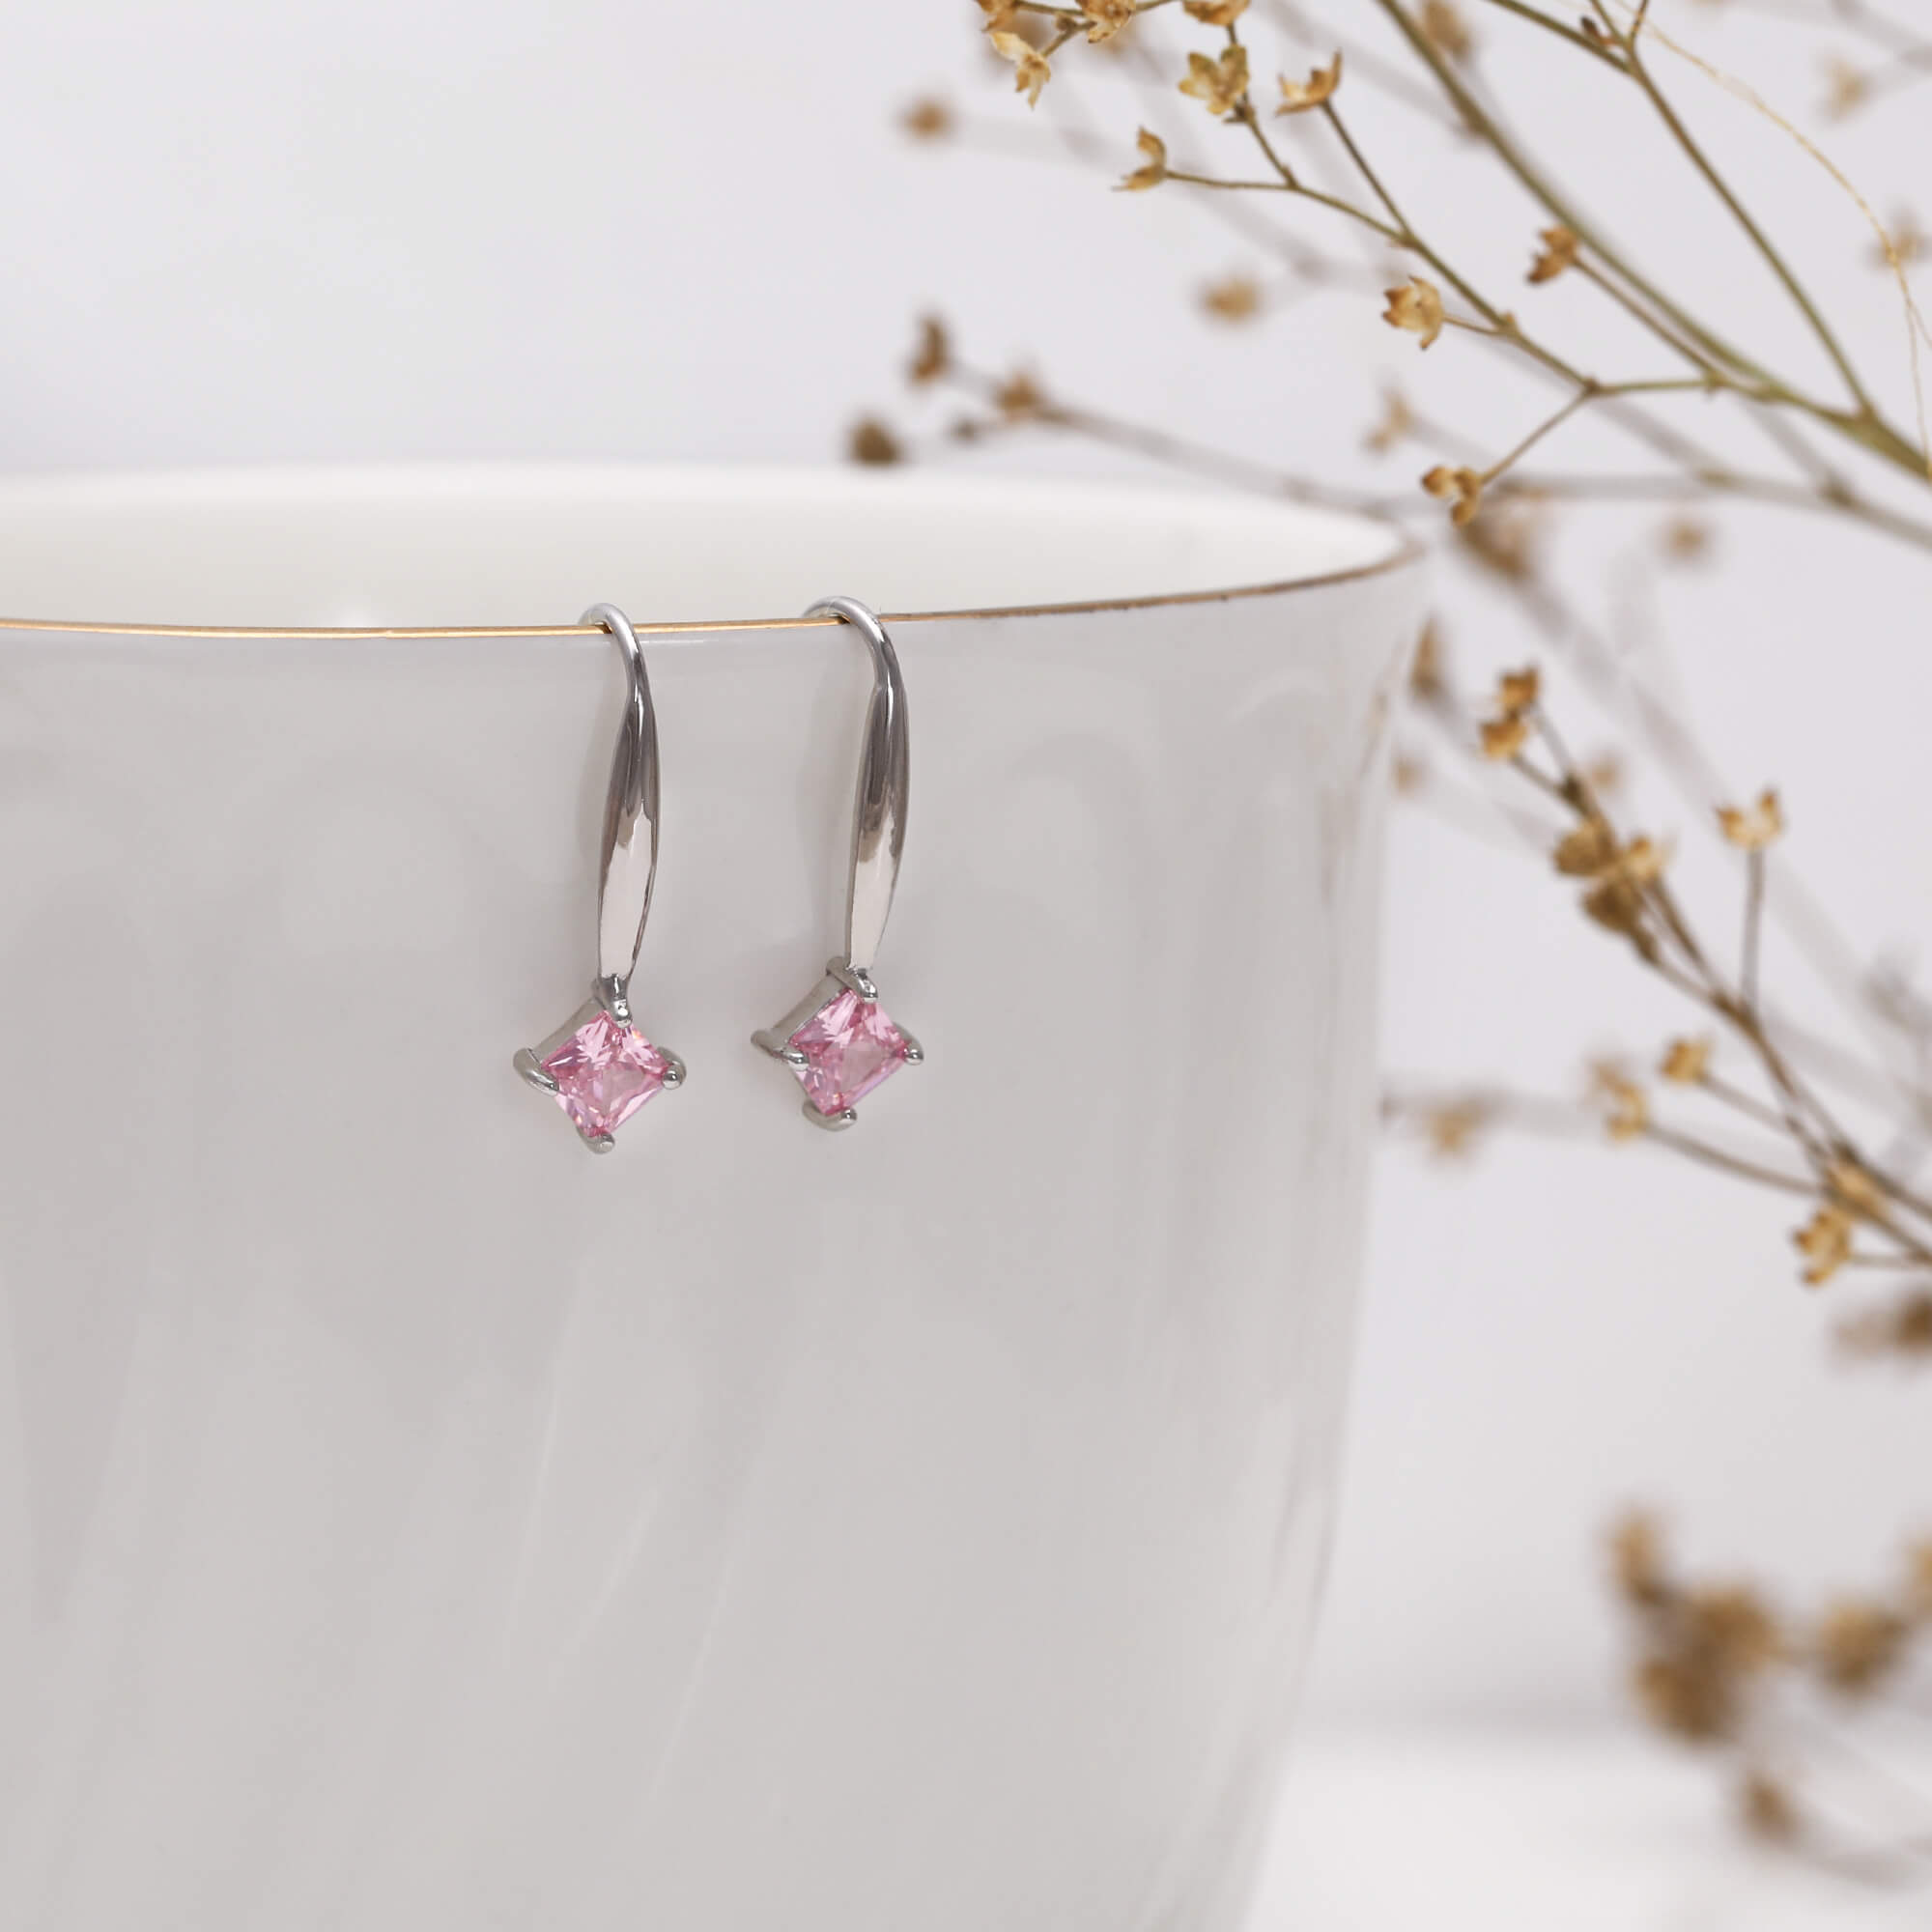 Baby Grand Piano Earrings | Silver plate and sterling silver | by Weait  Music